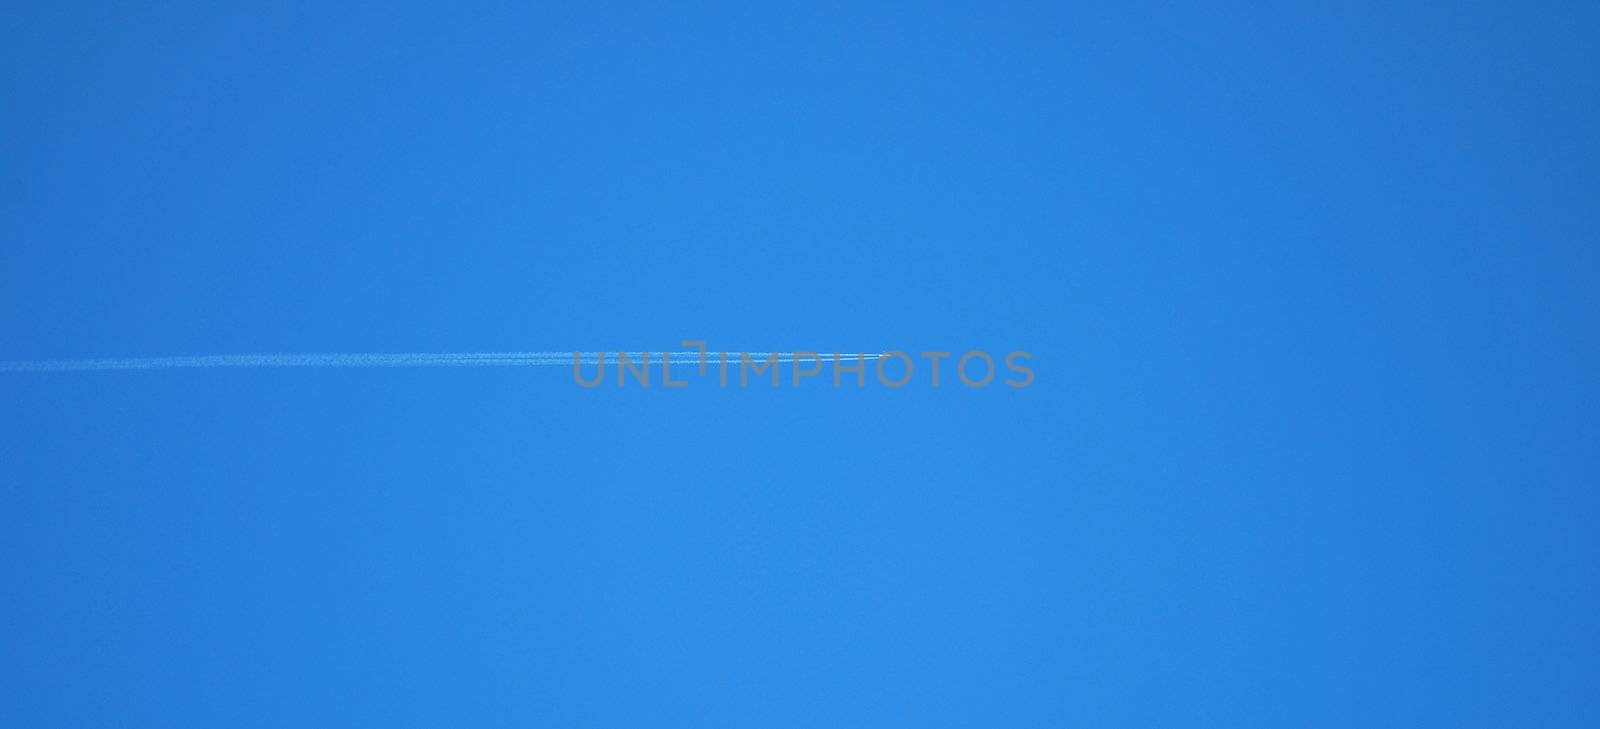 Passenger jet plane on clear, blue sky. Vapor traces parallel to the image edge. 